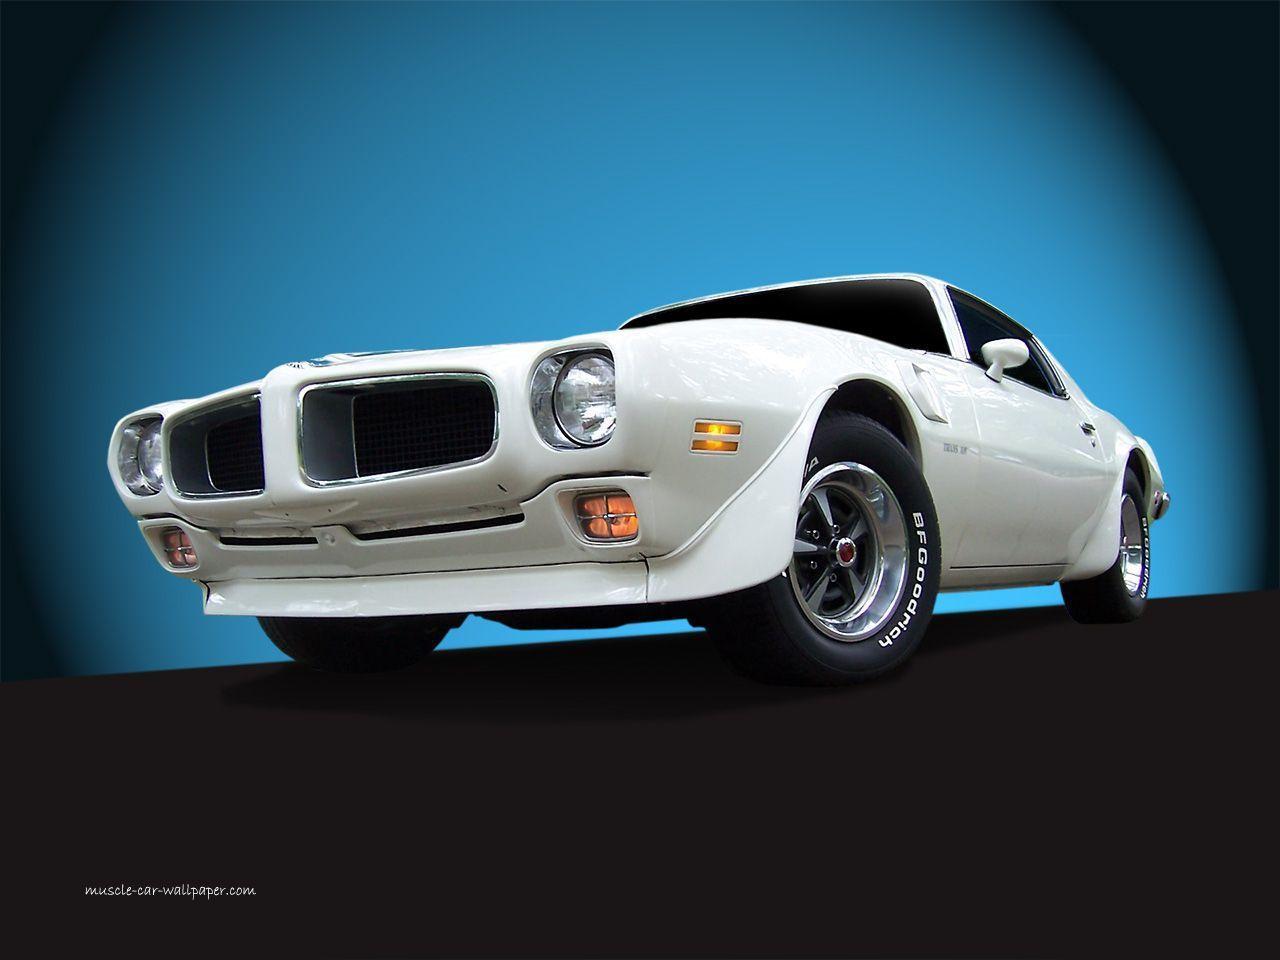 Muscle Car Wallpaper. Classic Muscle Car Picture